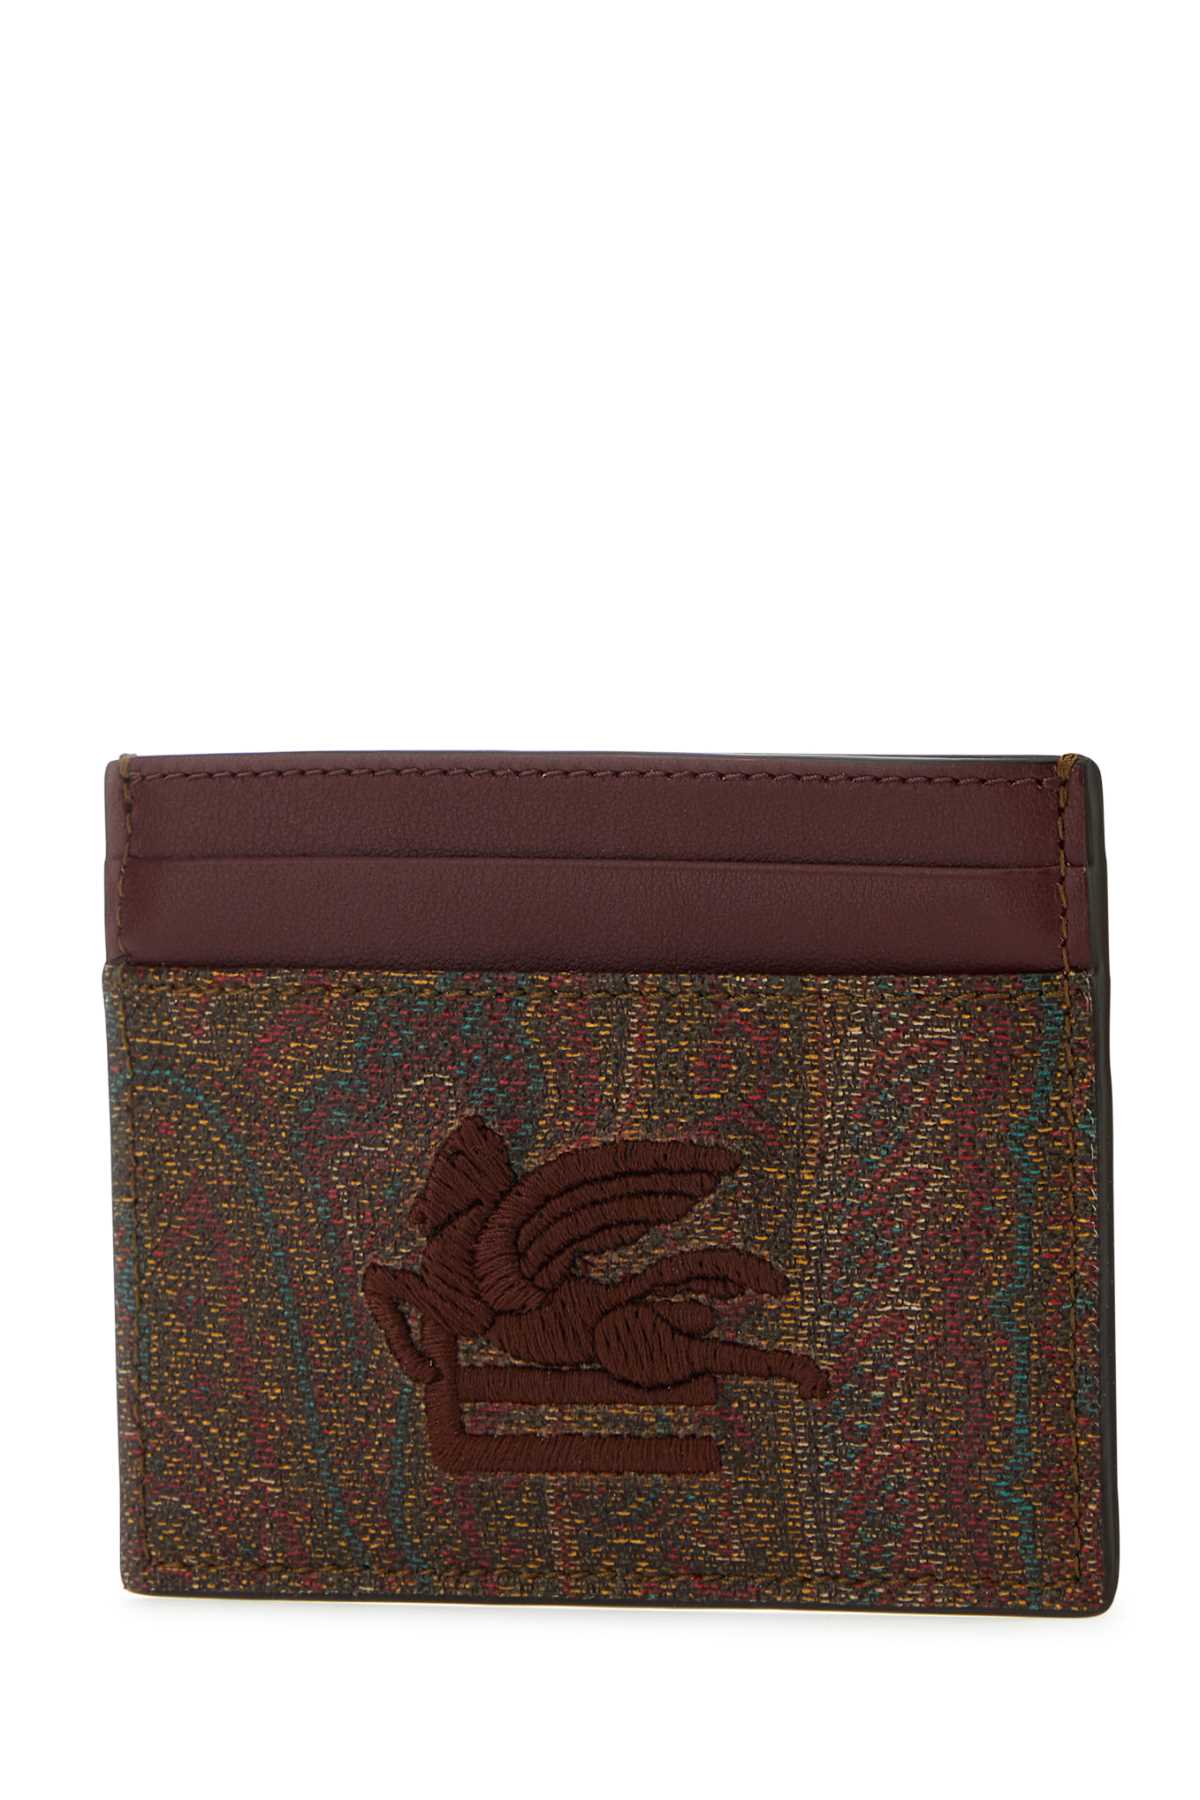 Etro Multicolor Canvas And Leather Card Holder In 600